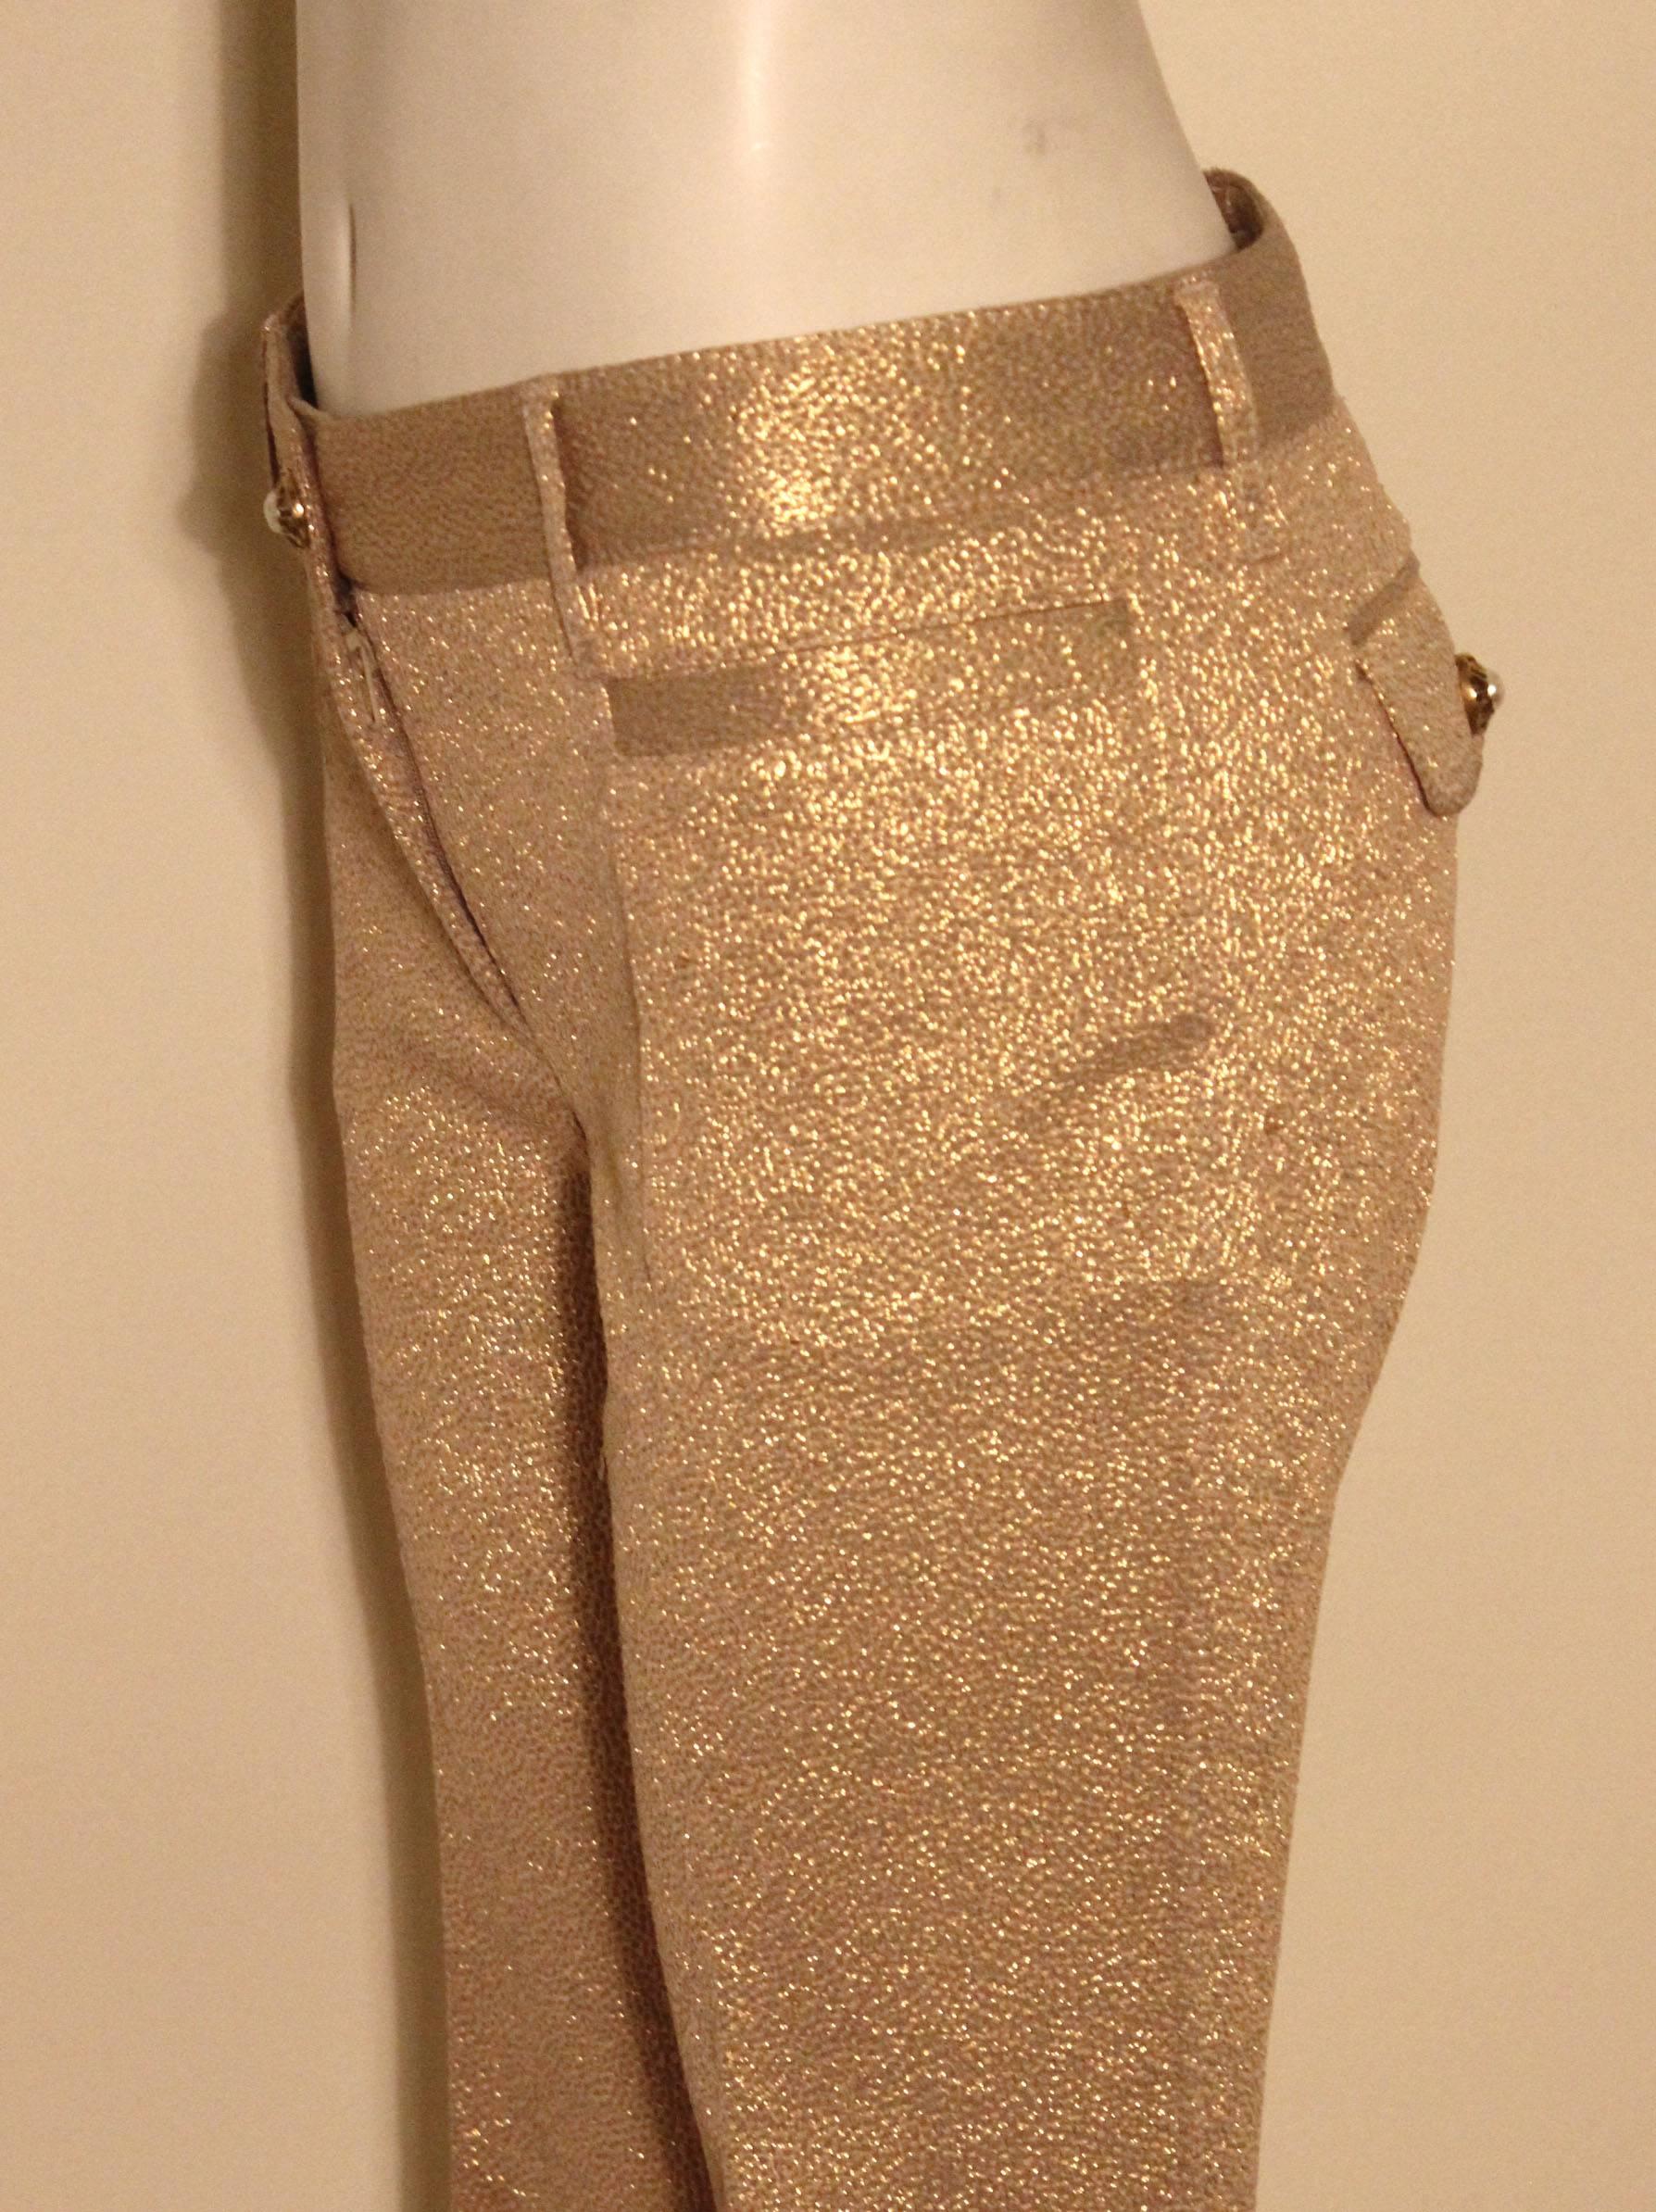 Dolce & Gabbana Metallic Gold Pant Suit For Sale 4